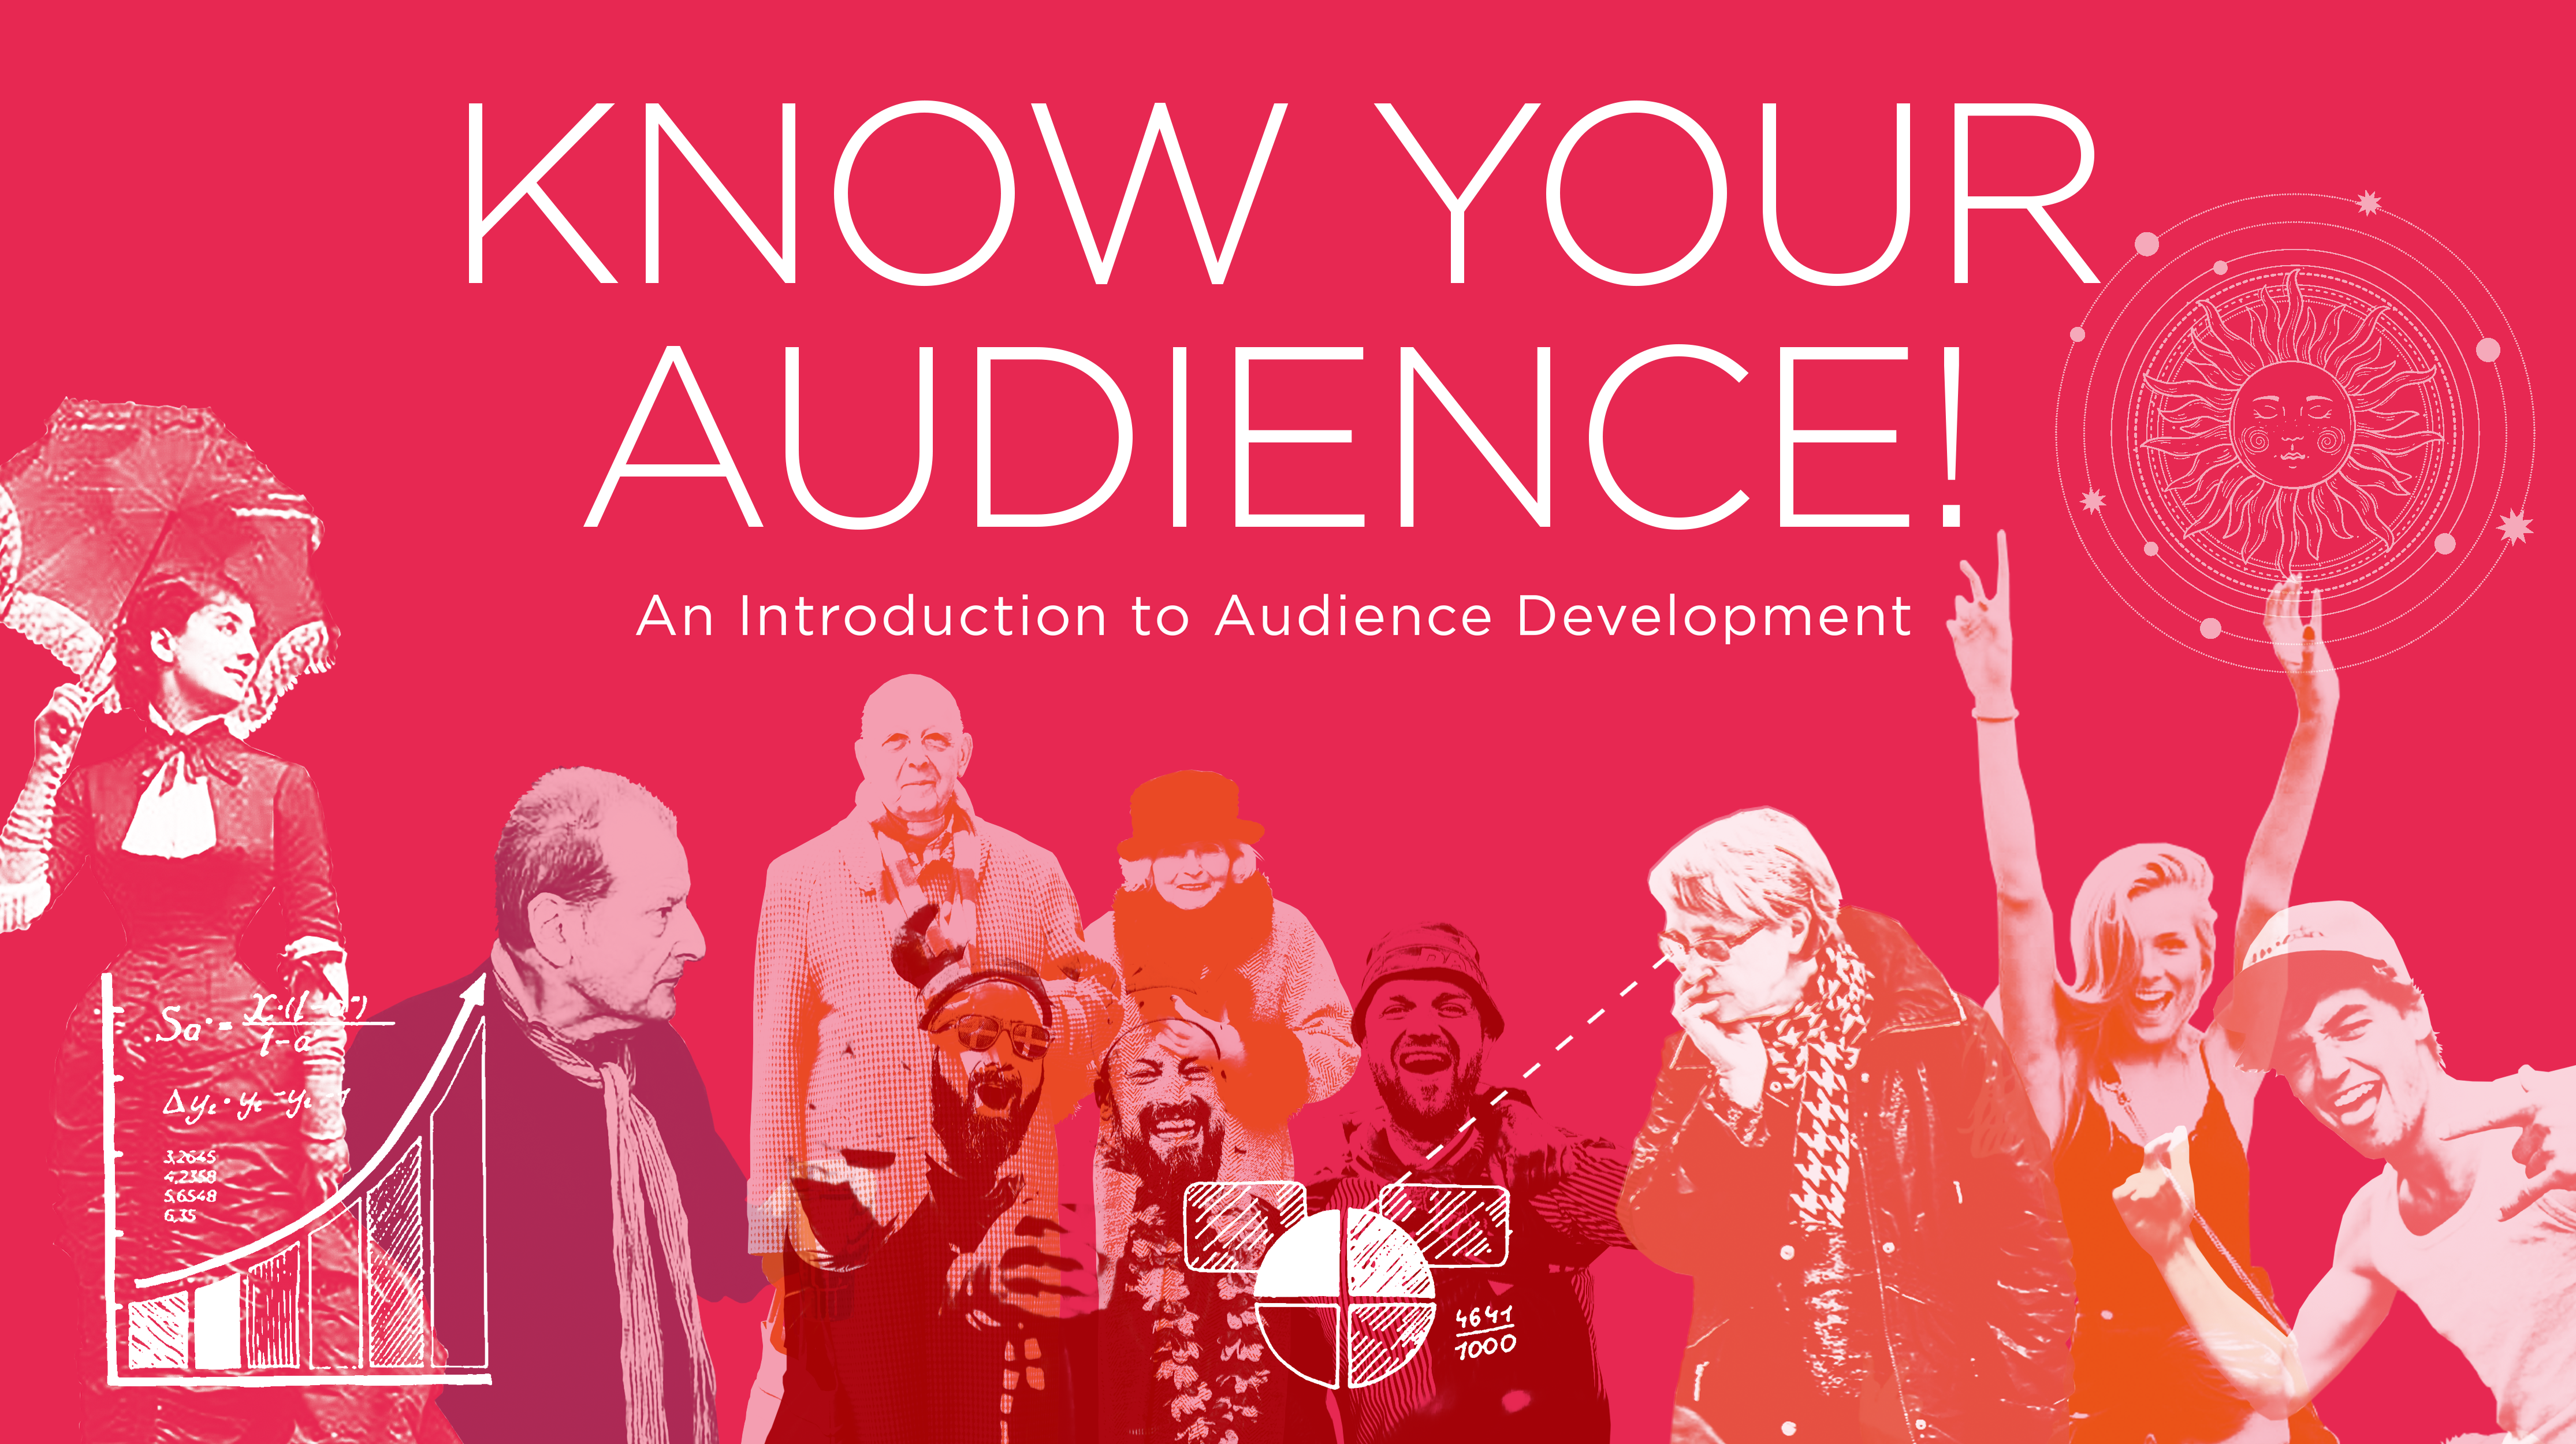 Applaus - ENG. VERSION: KNOW YOUR AUDIENCE!